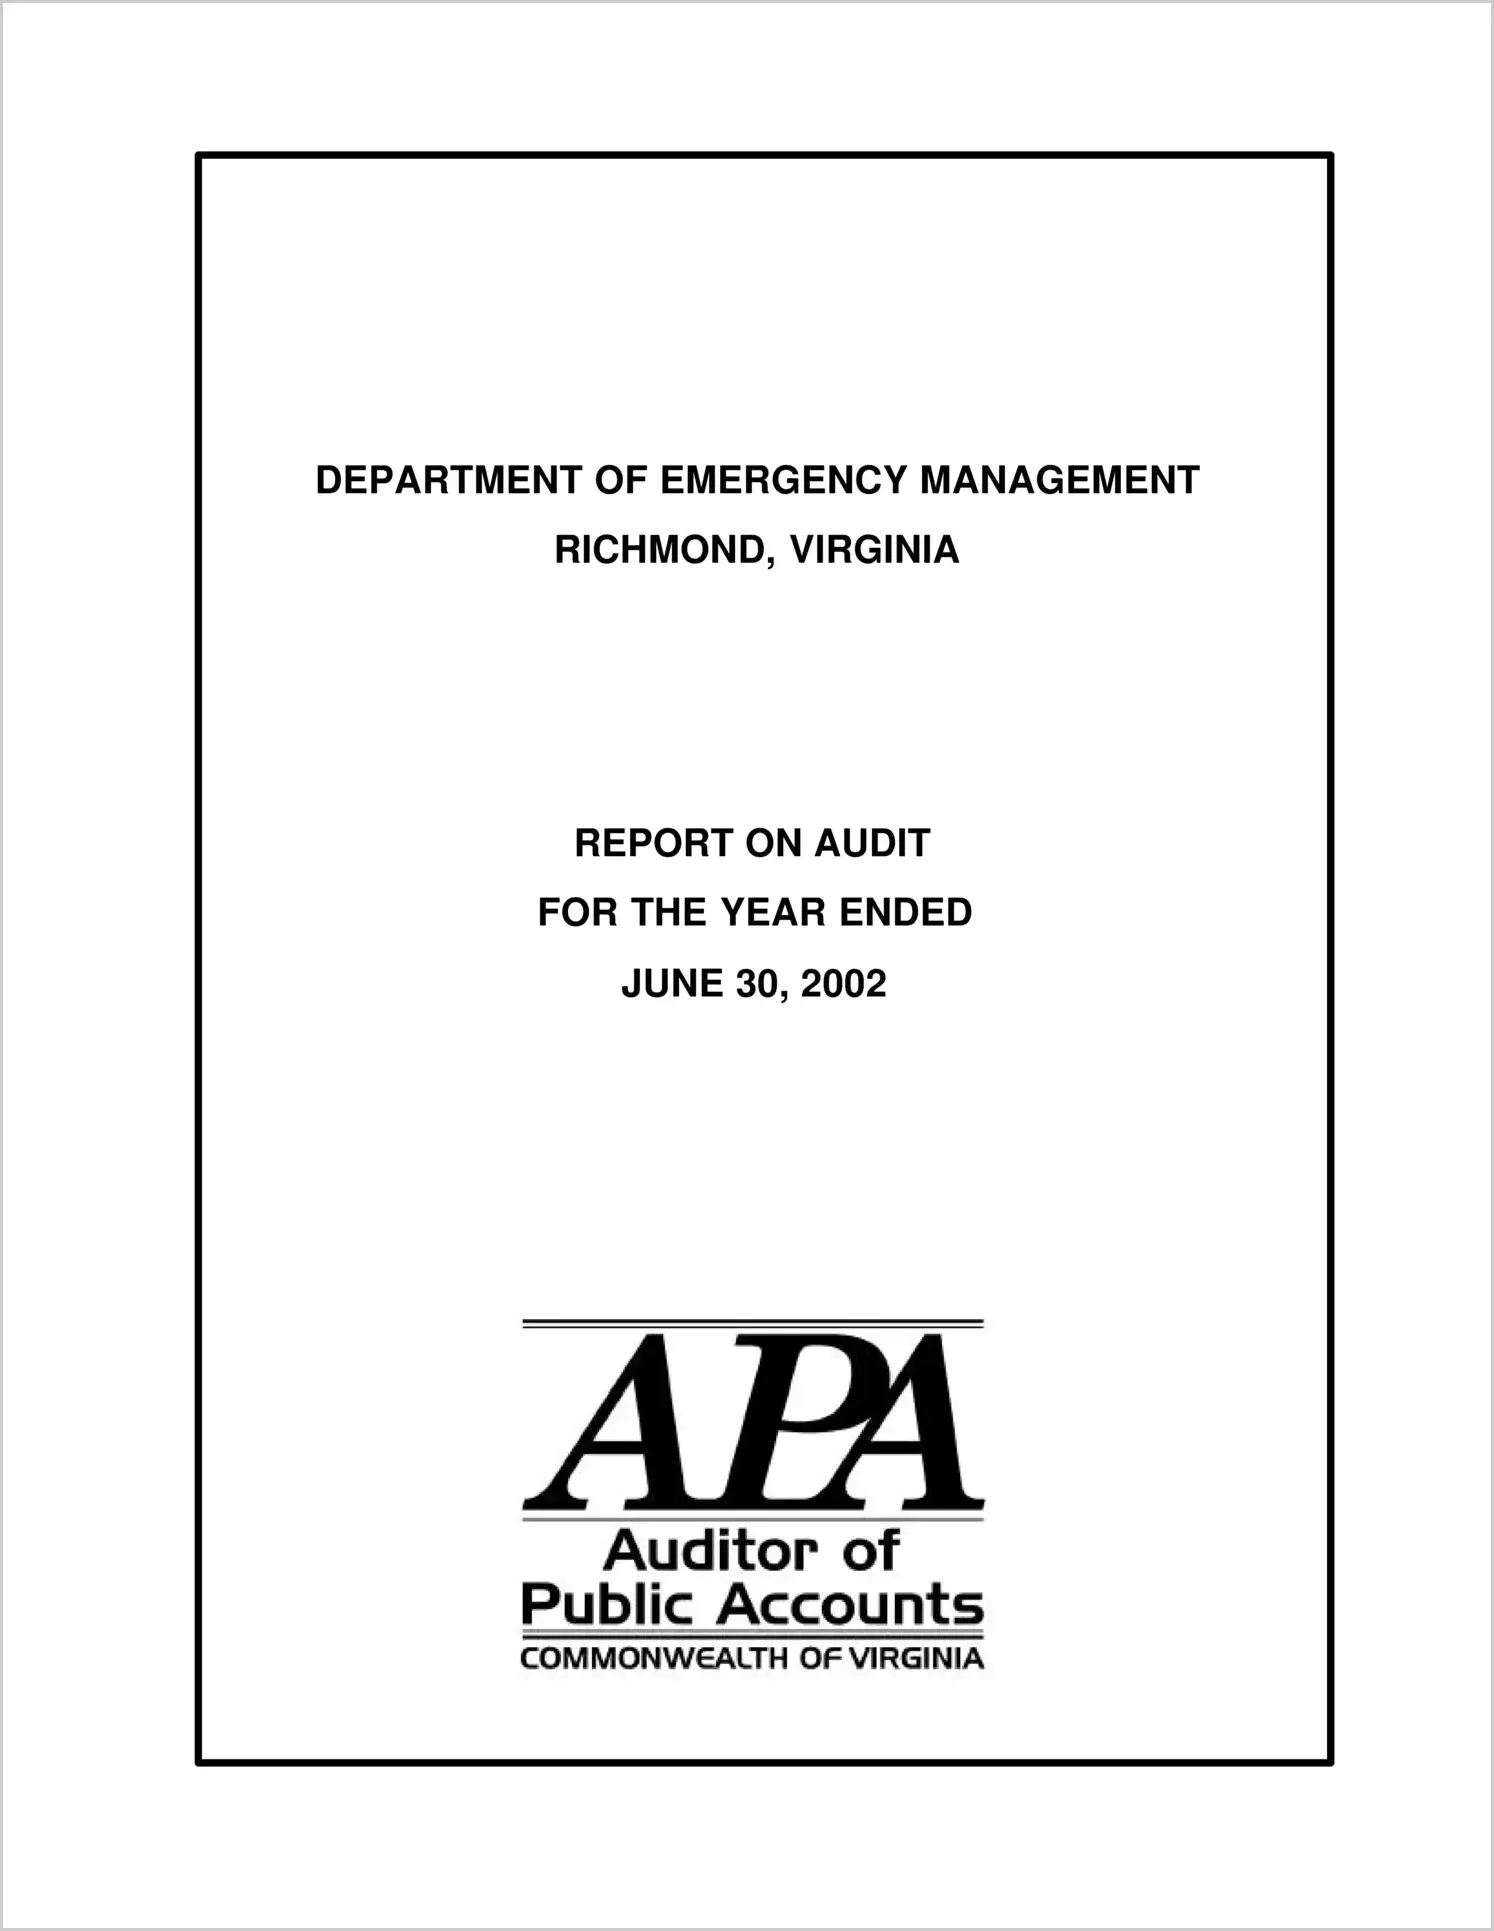 Department of Emergency Management for the year ended June 30, 2002